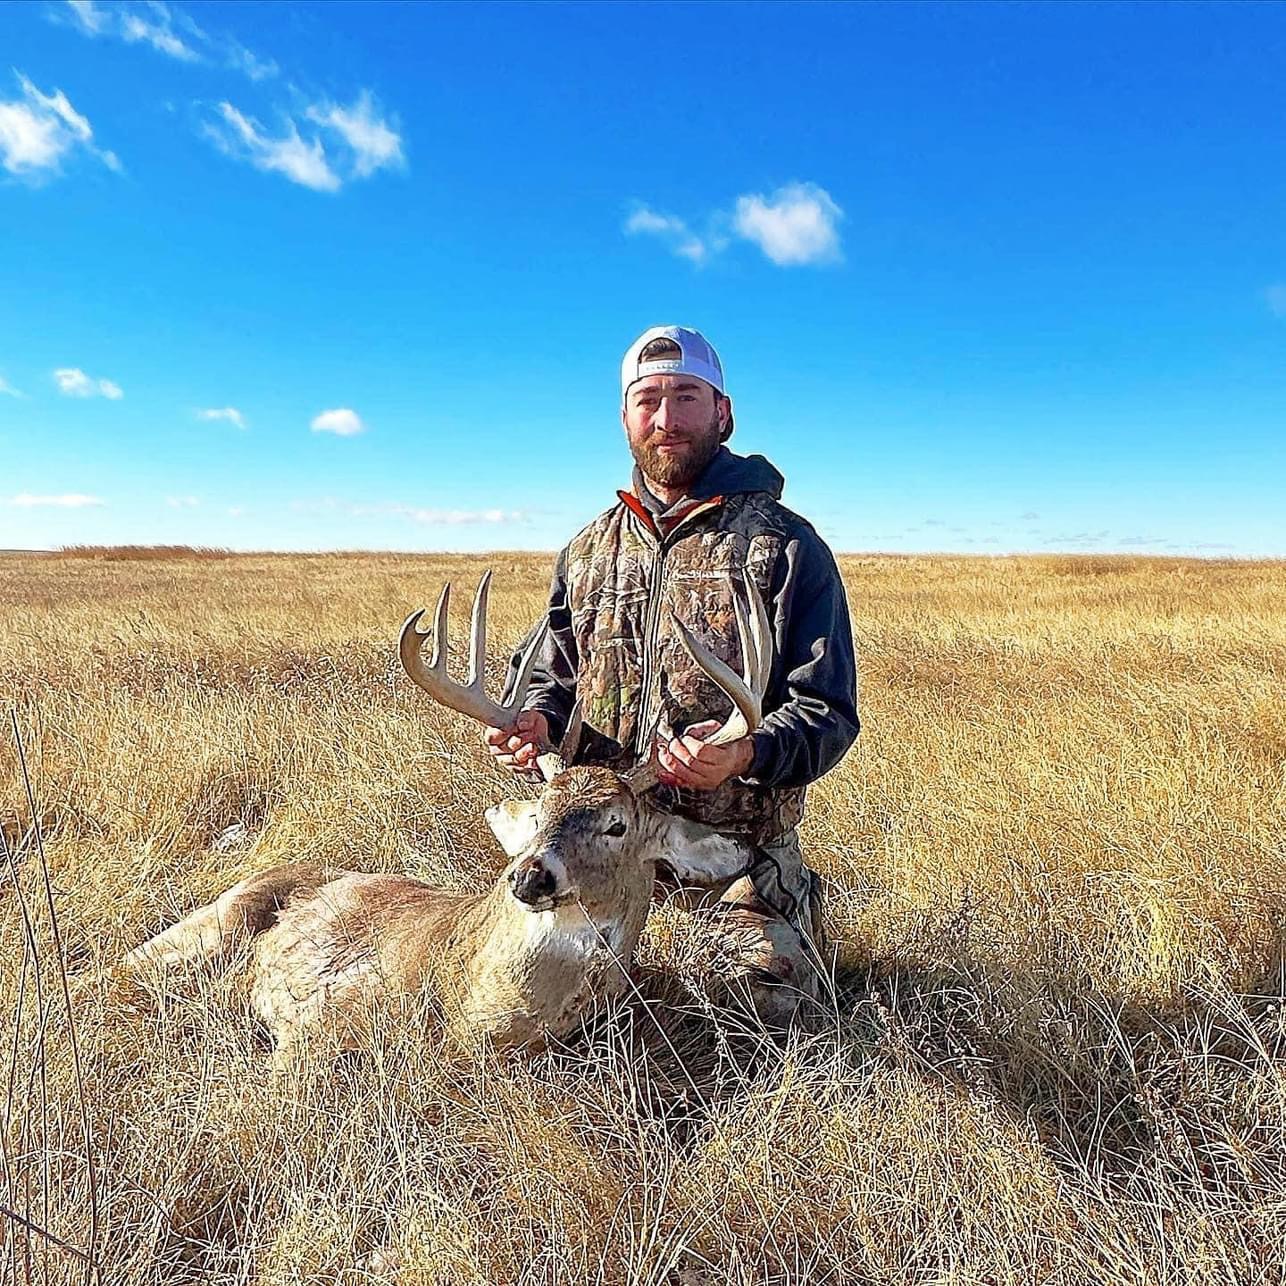 The buck harvested by this hunter had a deer pearl.